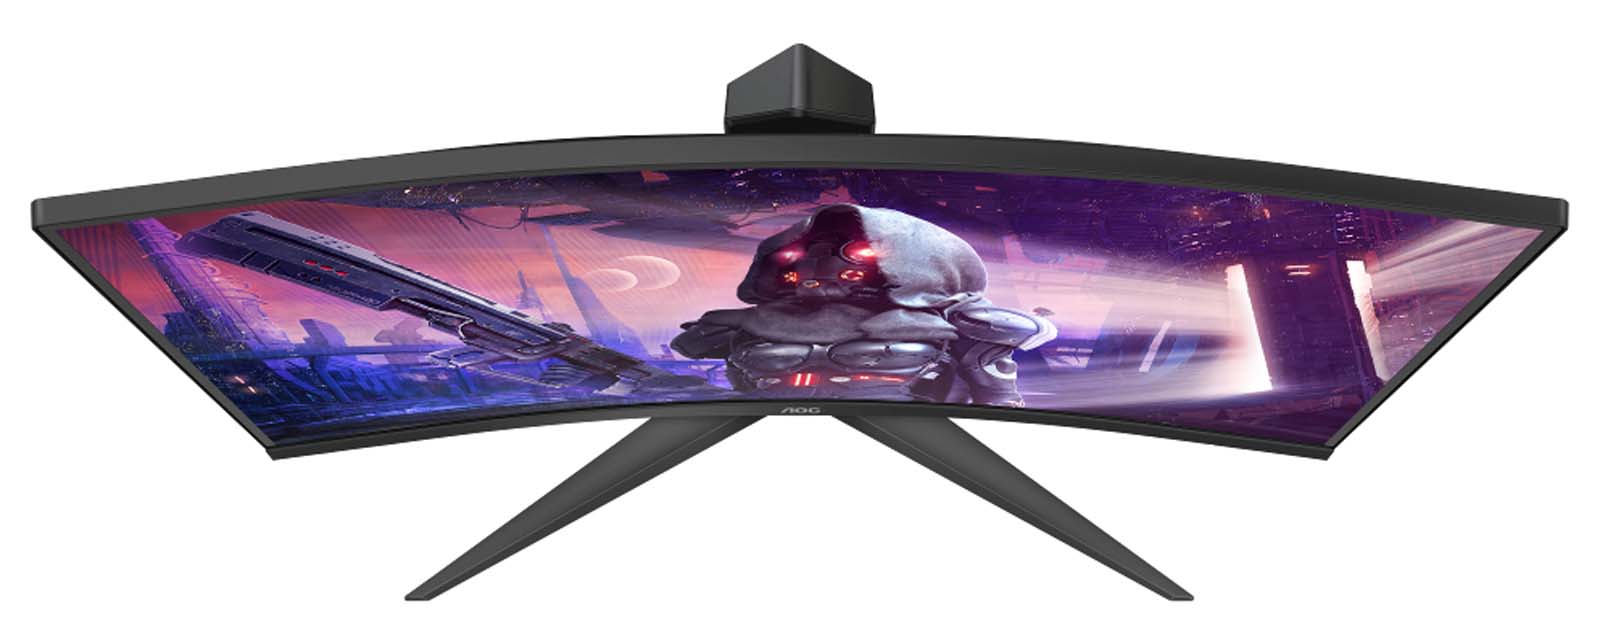 AOC announces four new gaming displays with 165 Hz and 1500R curvature